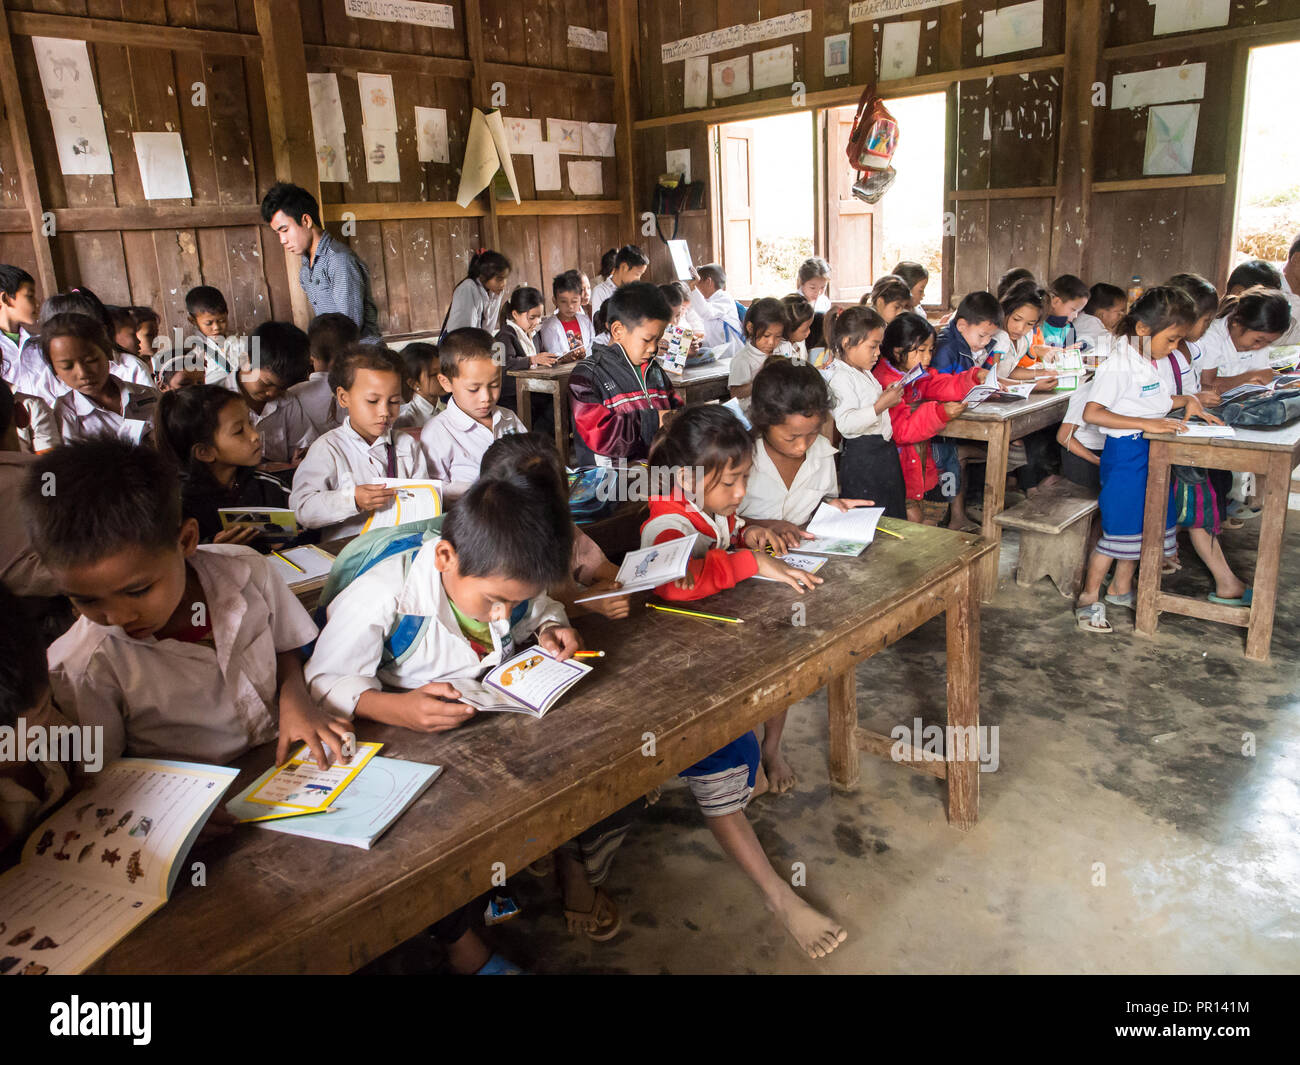 Primary school classroom full of students, Houy Mieng village, Laos, Indochina, Southeast Asia, Asia Stock Photo